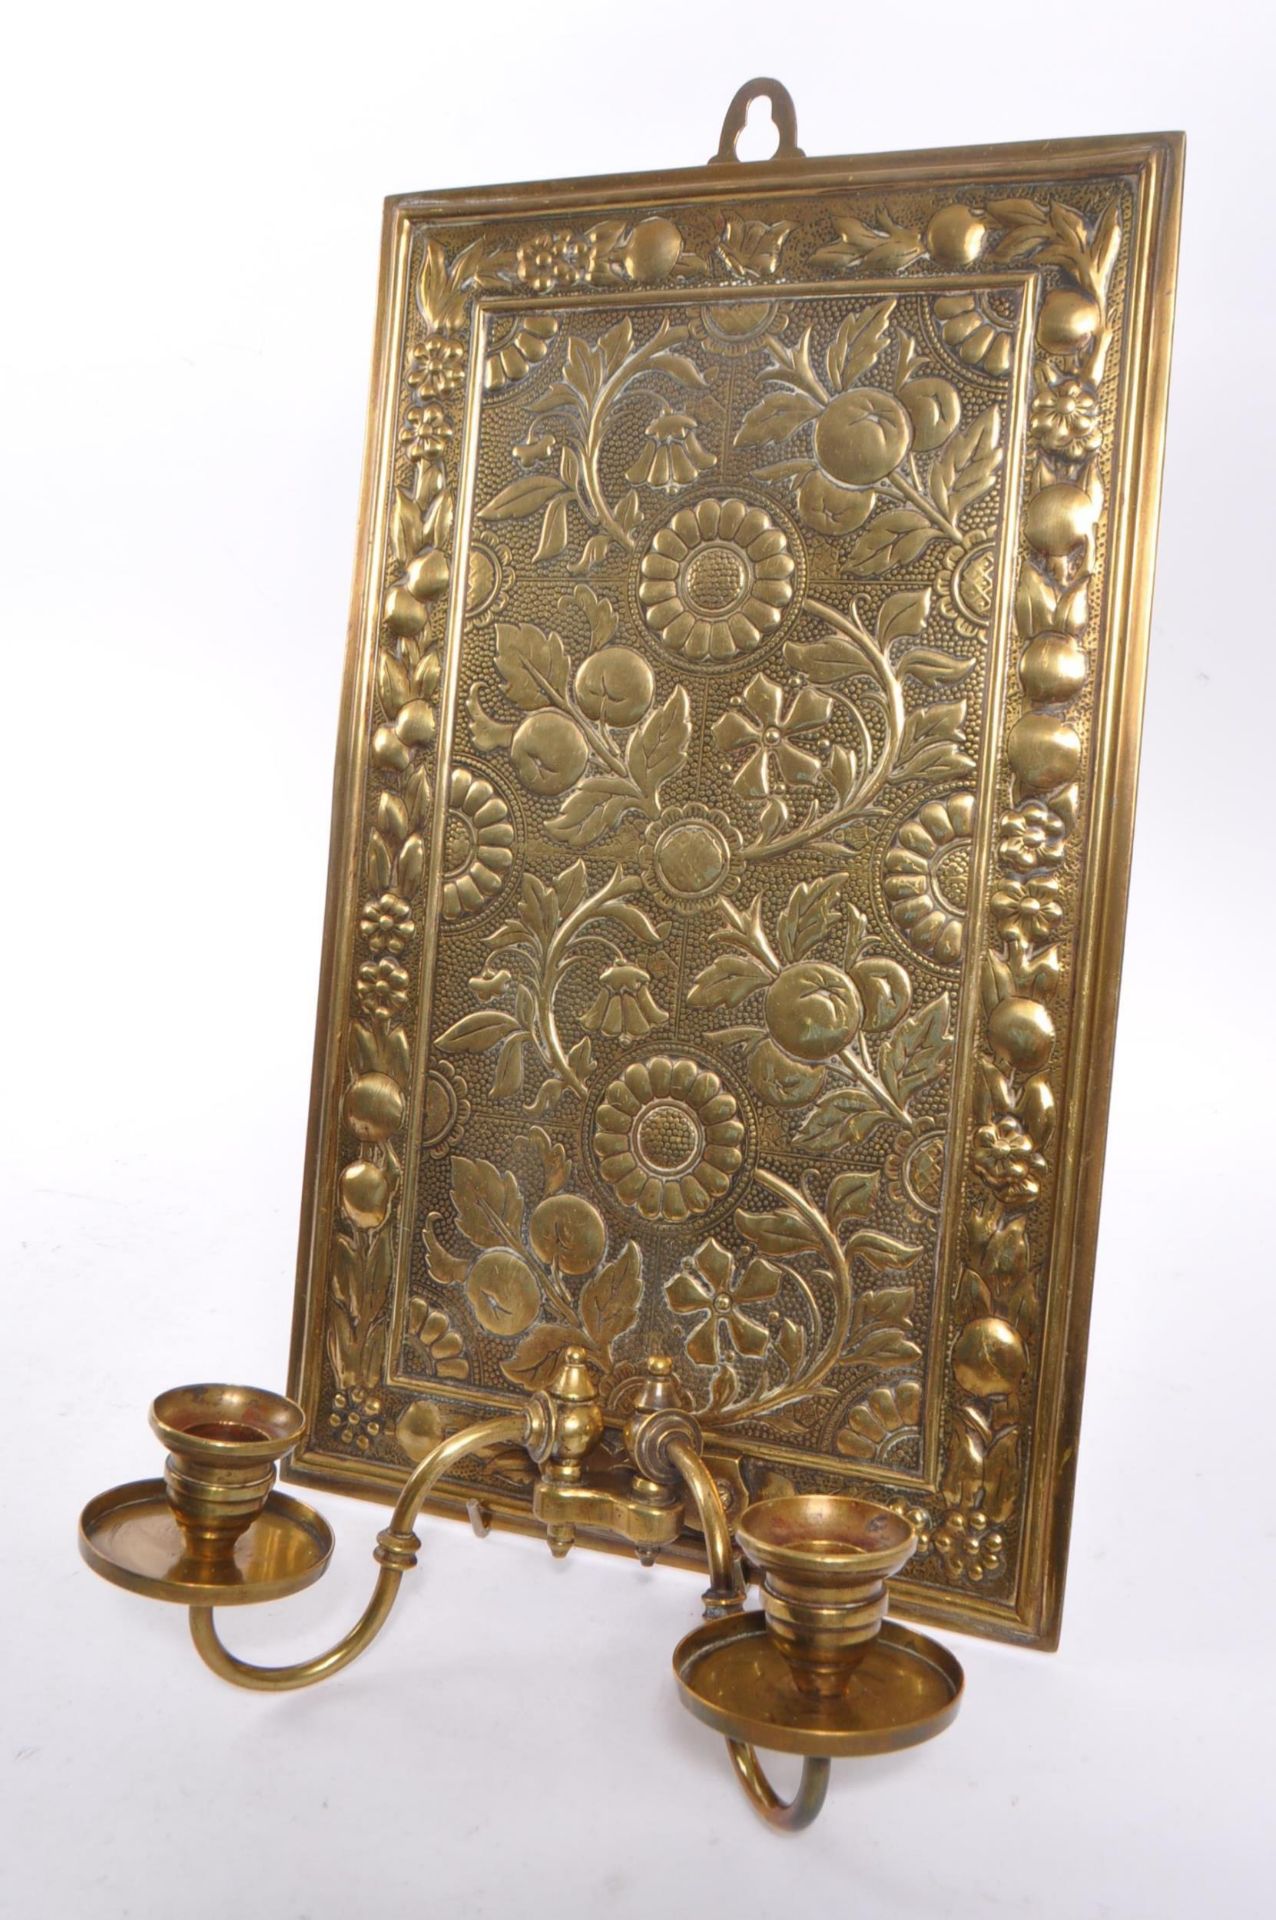 ARTS & CRAFTS AESTHETIC BRASS WALL SCONCE - Image 3 of 7